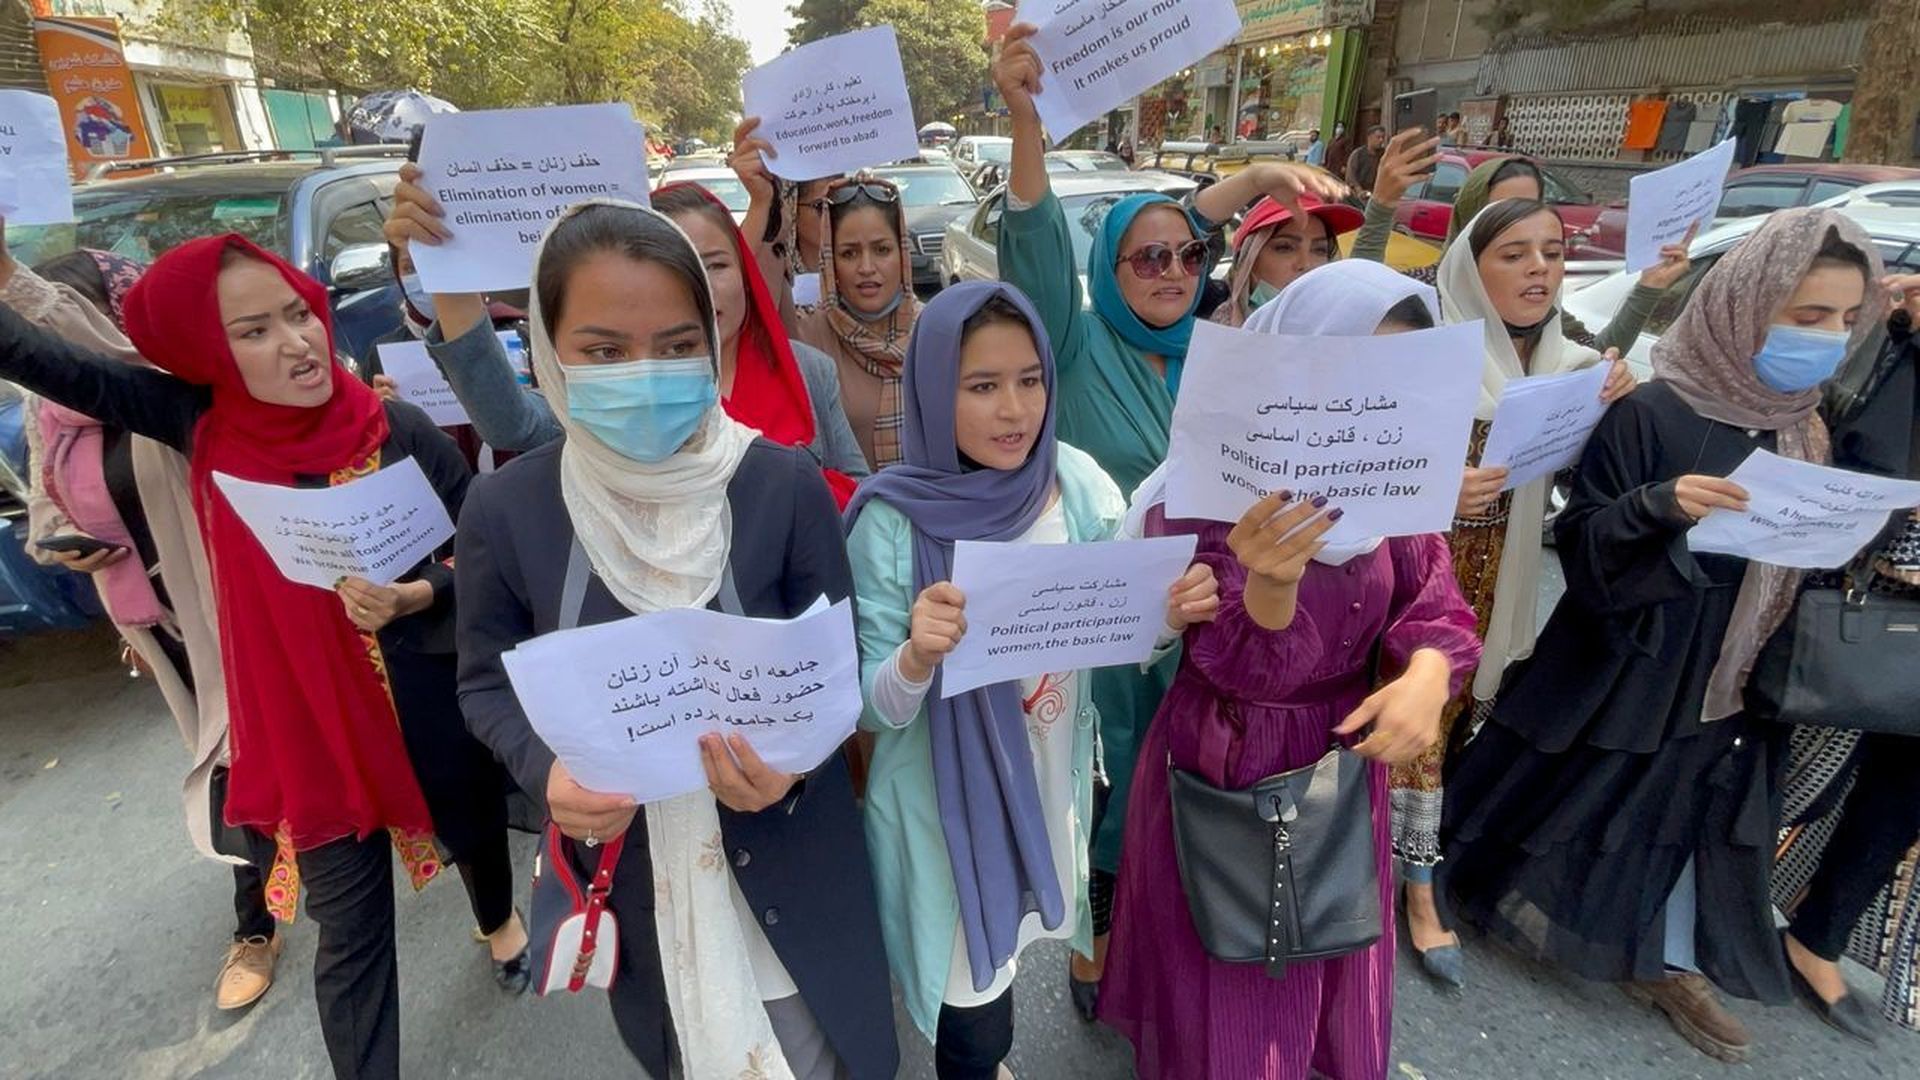 Afghan women activists gathered to protest against Taliban restrictions